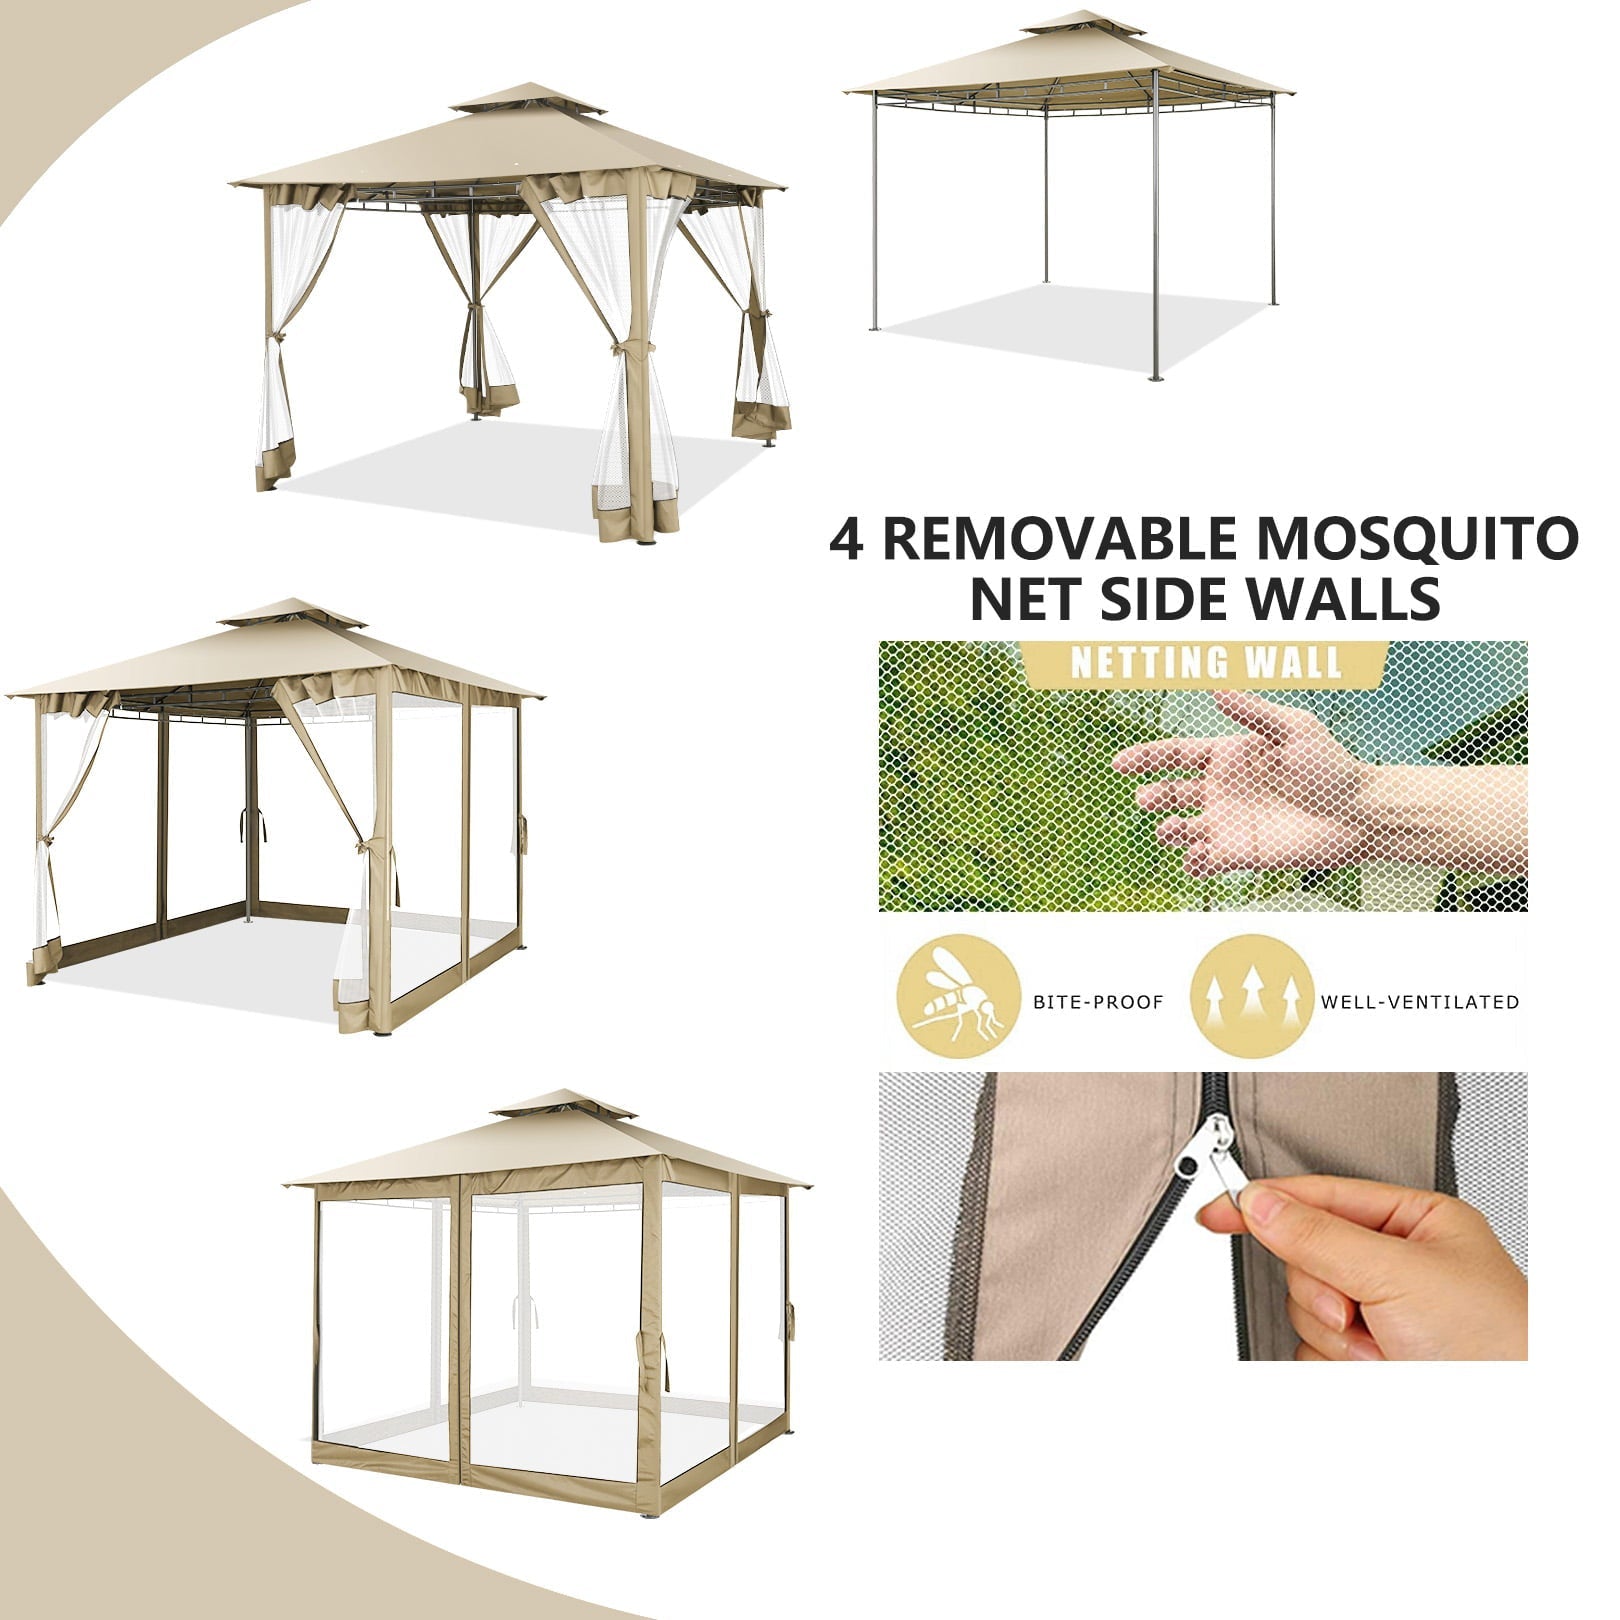 10 ' x 10 ' Gazebos for Patios, Gazebo Canopy with 4 Mosquito Netting, Rainproof & Sunscreen Shelter Tent with Double Eaves for Garden Backyard and Deck